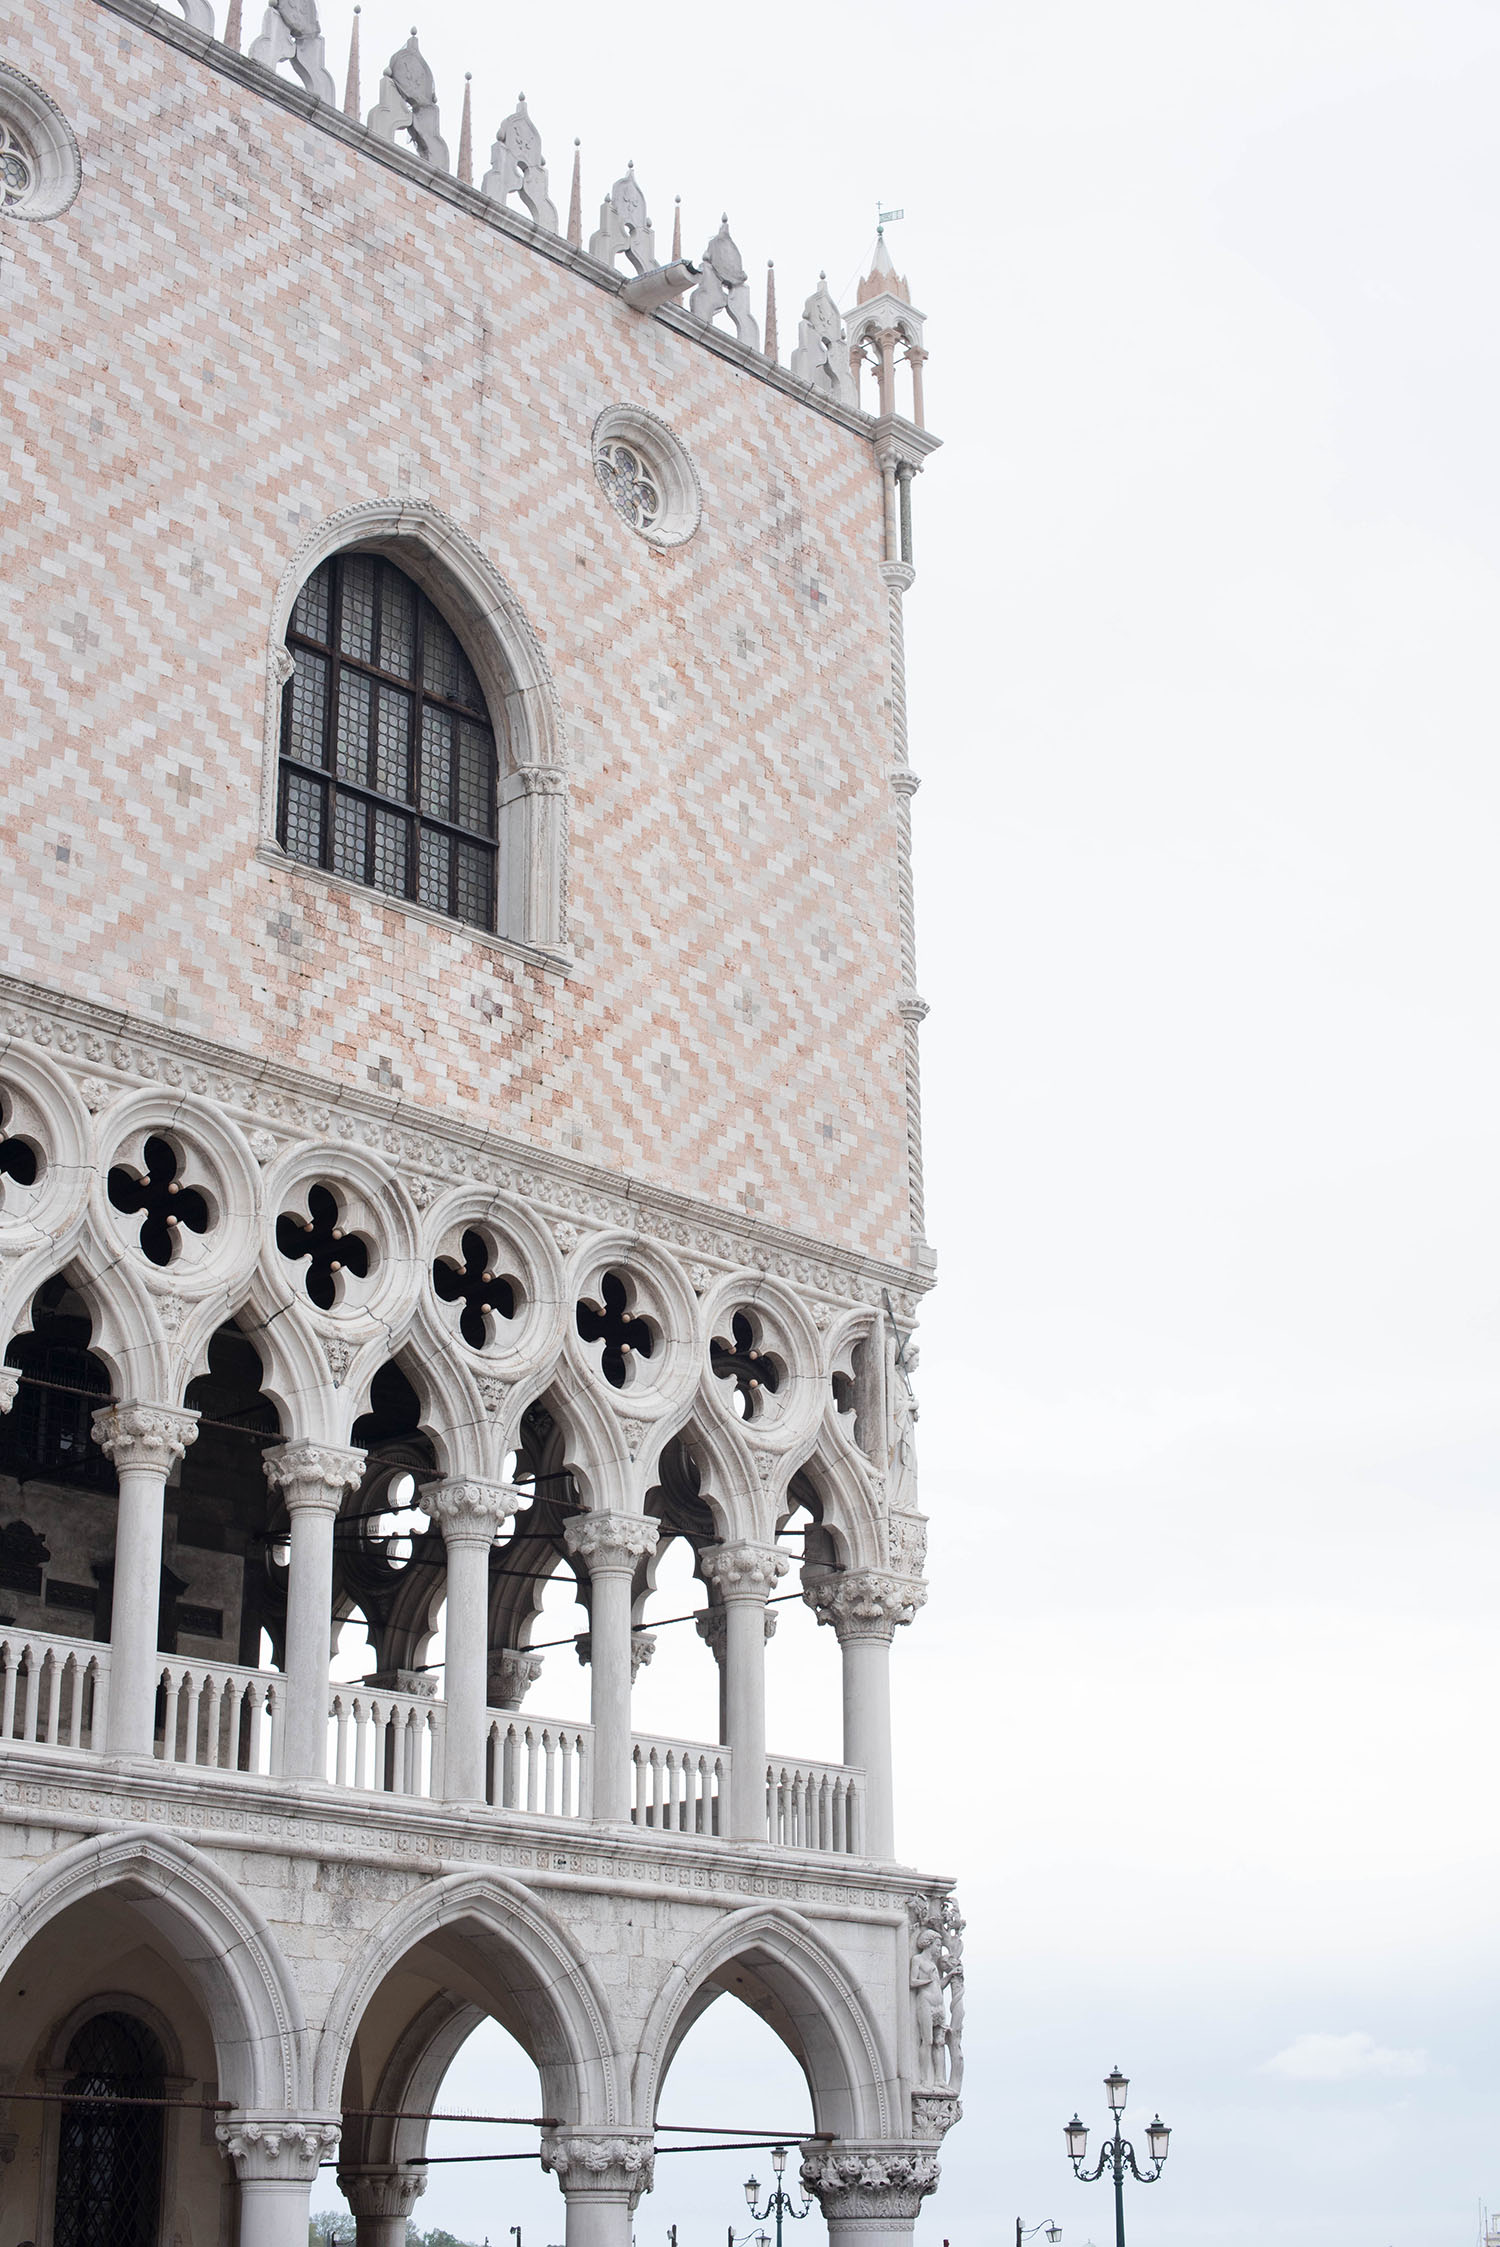 Photo of the Doges Palace at Saint Mark's Square in Venice by travel blogger Cee Fardoe of Coco & Vera